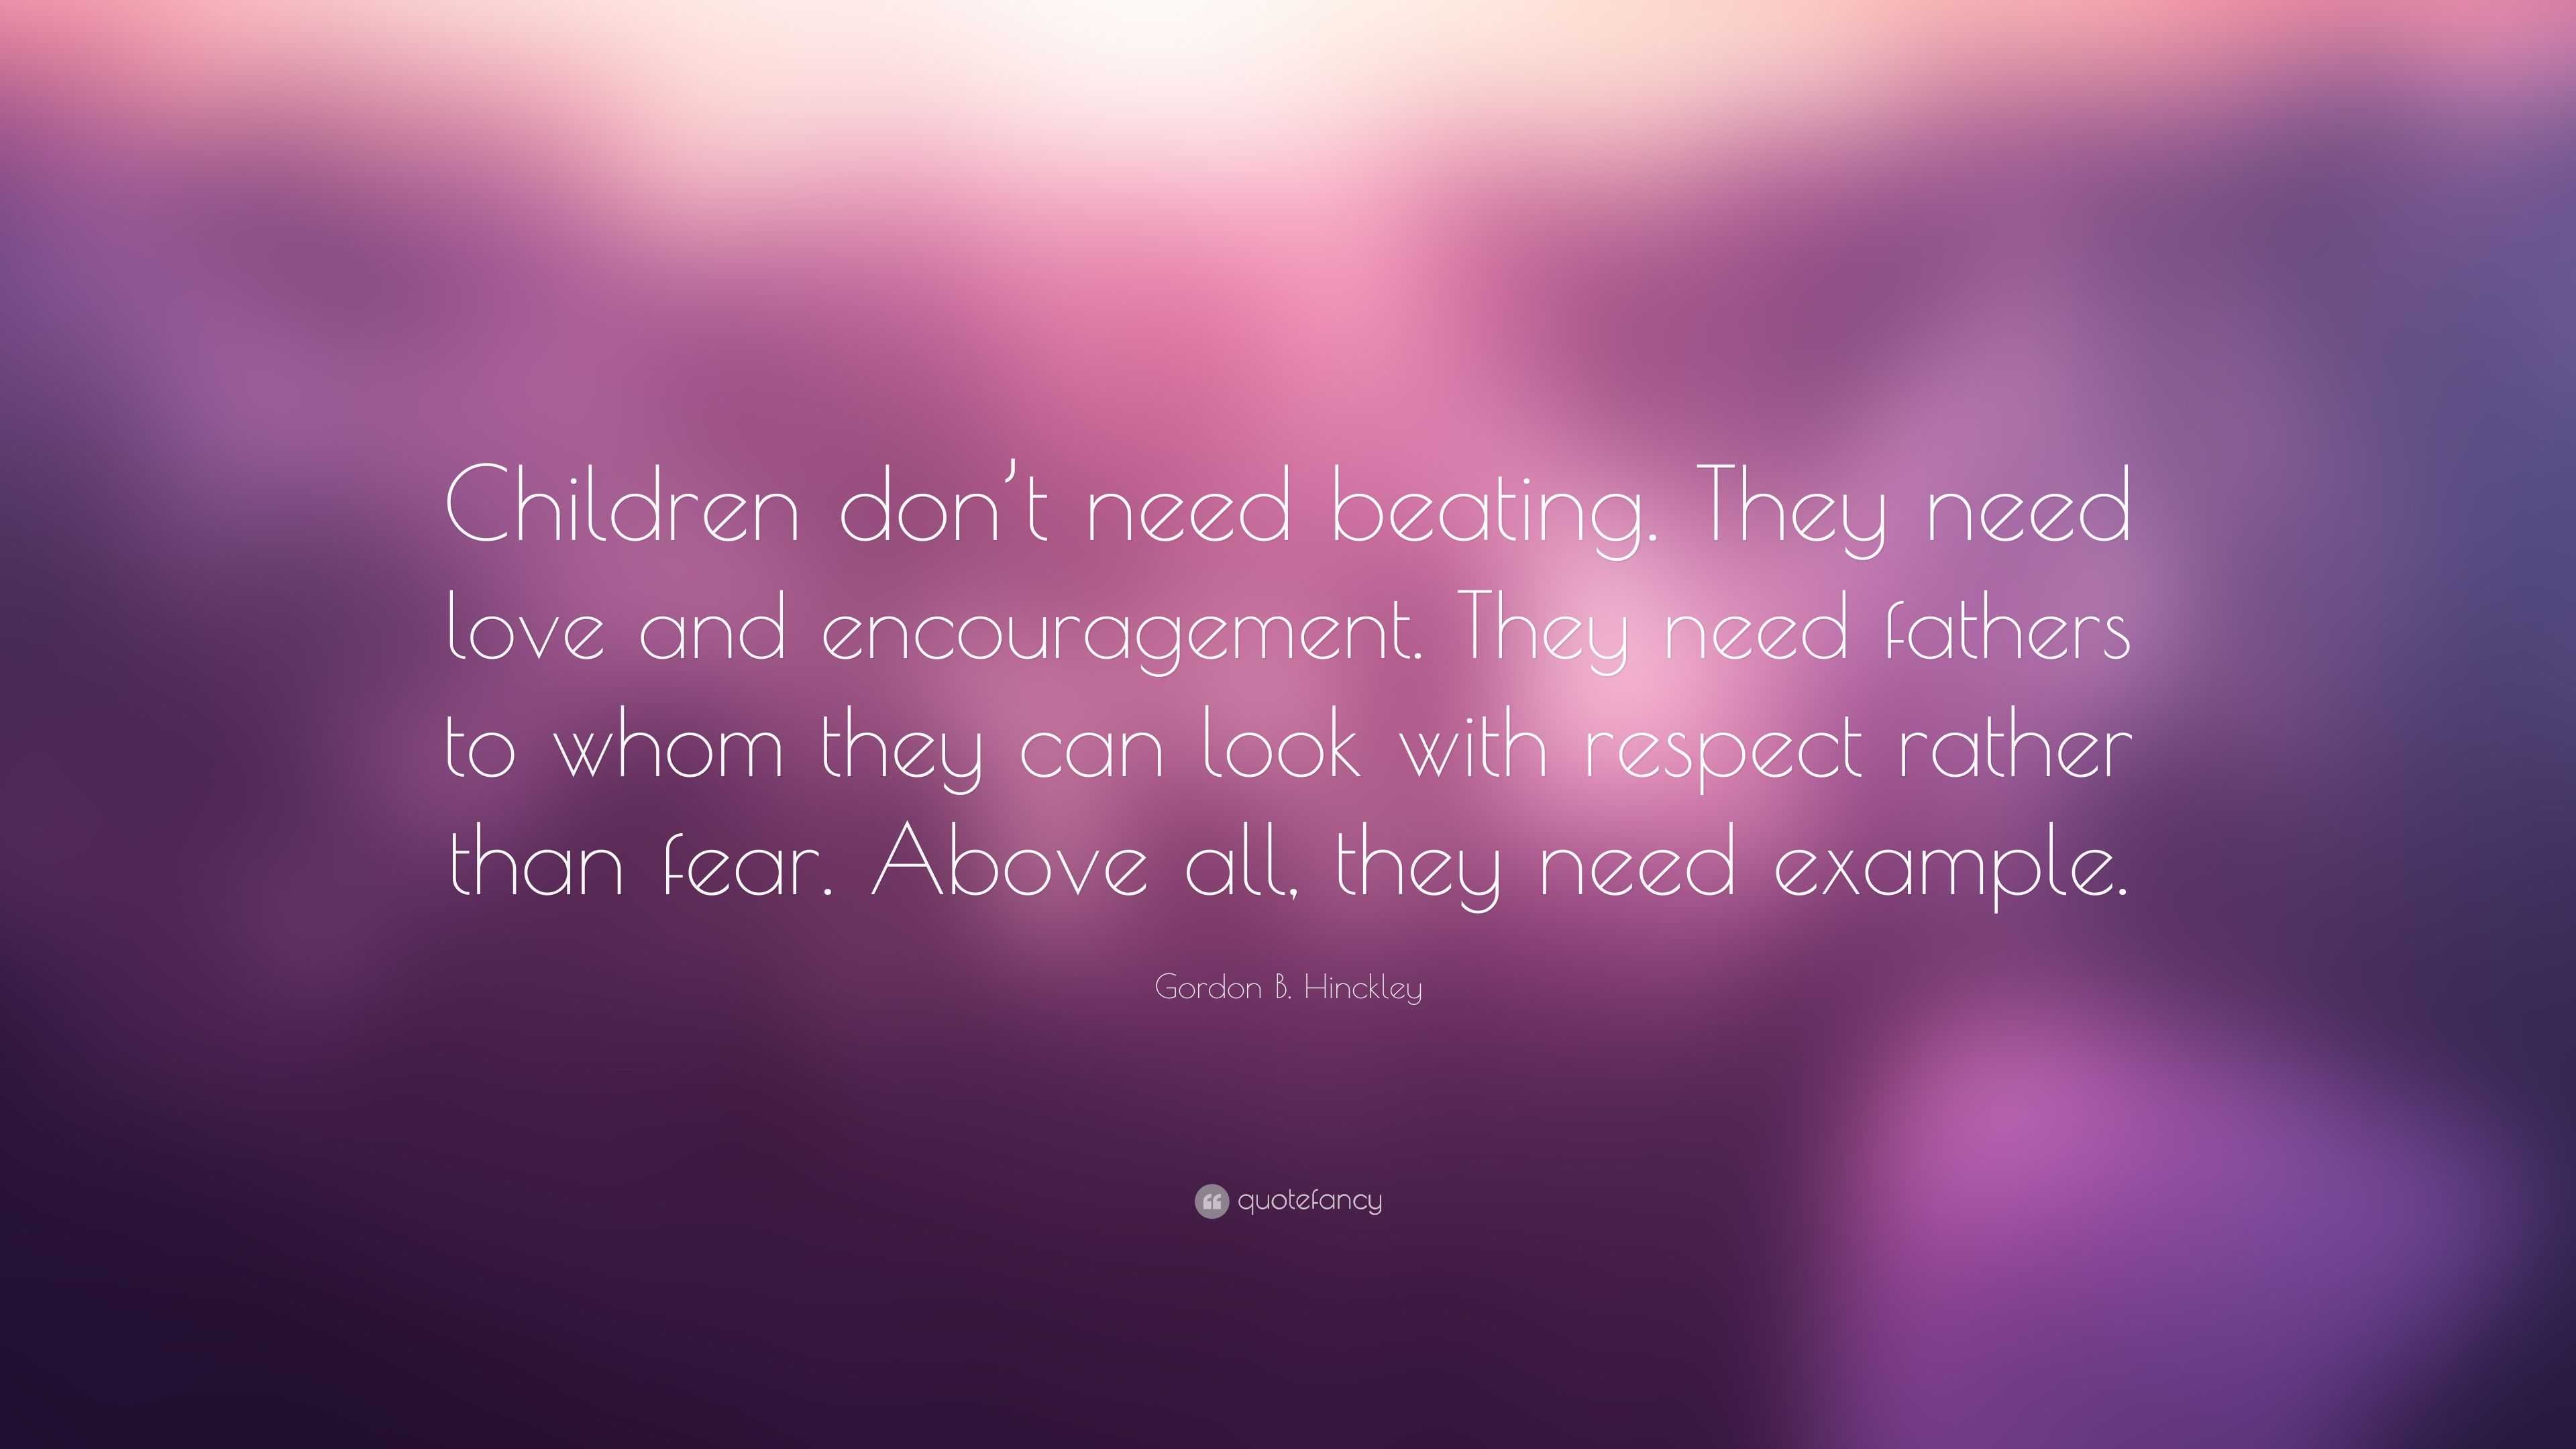 Gordon B Hinckley Quote “Children don t need beating They need